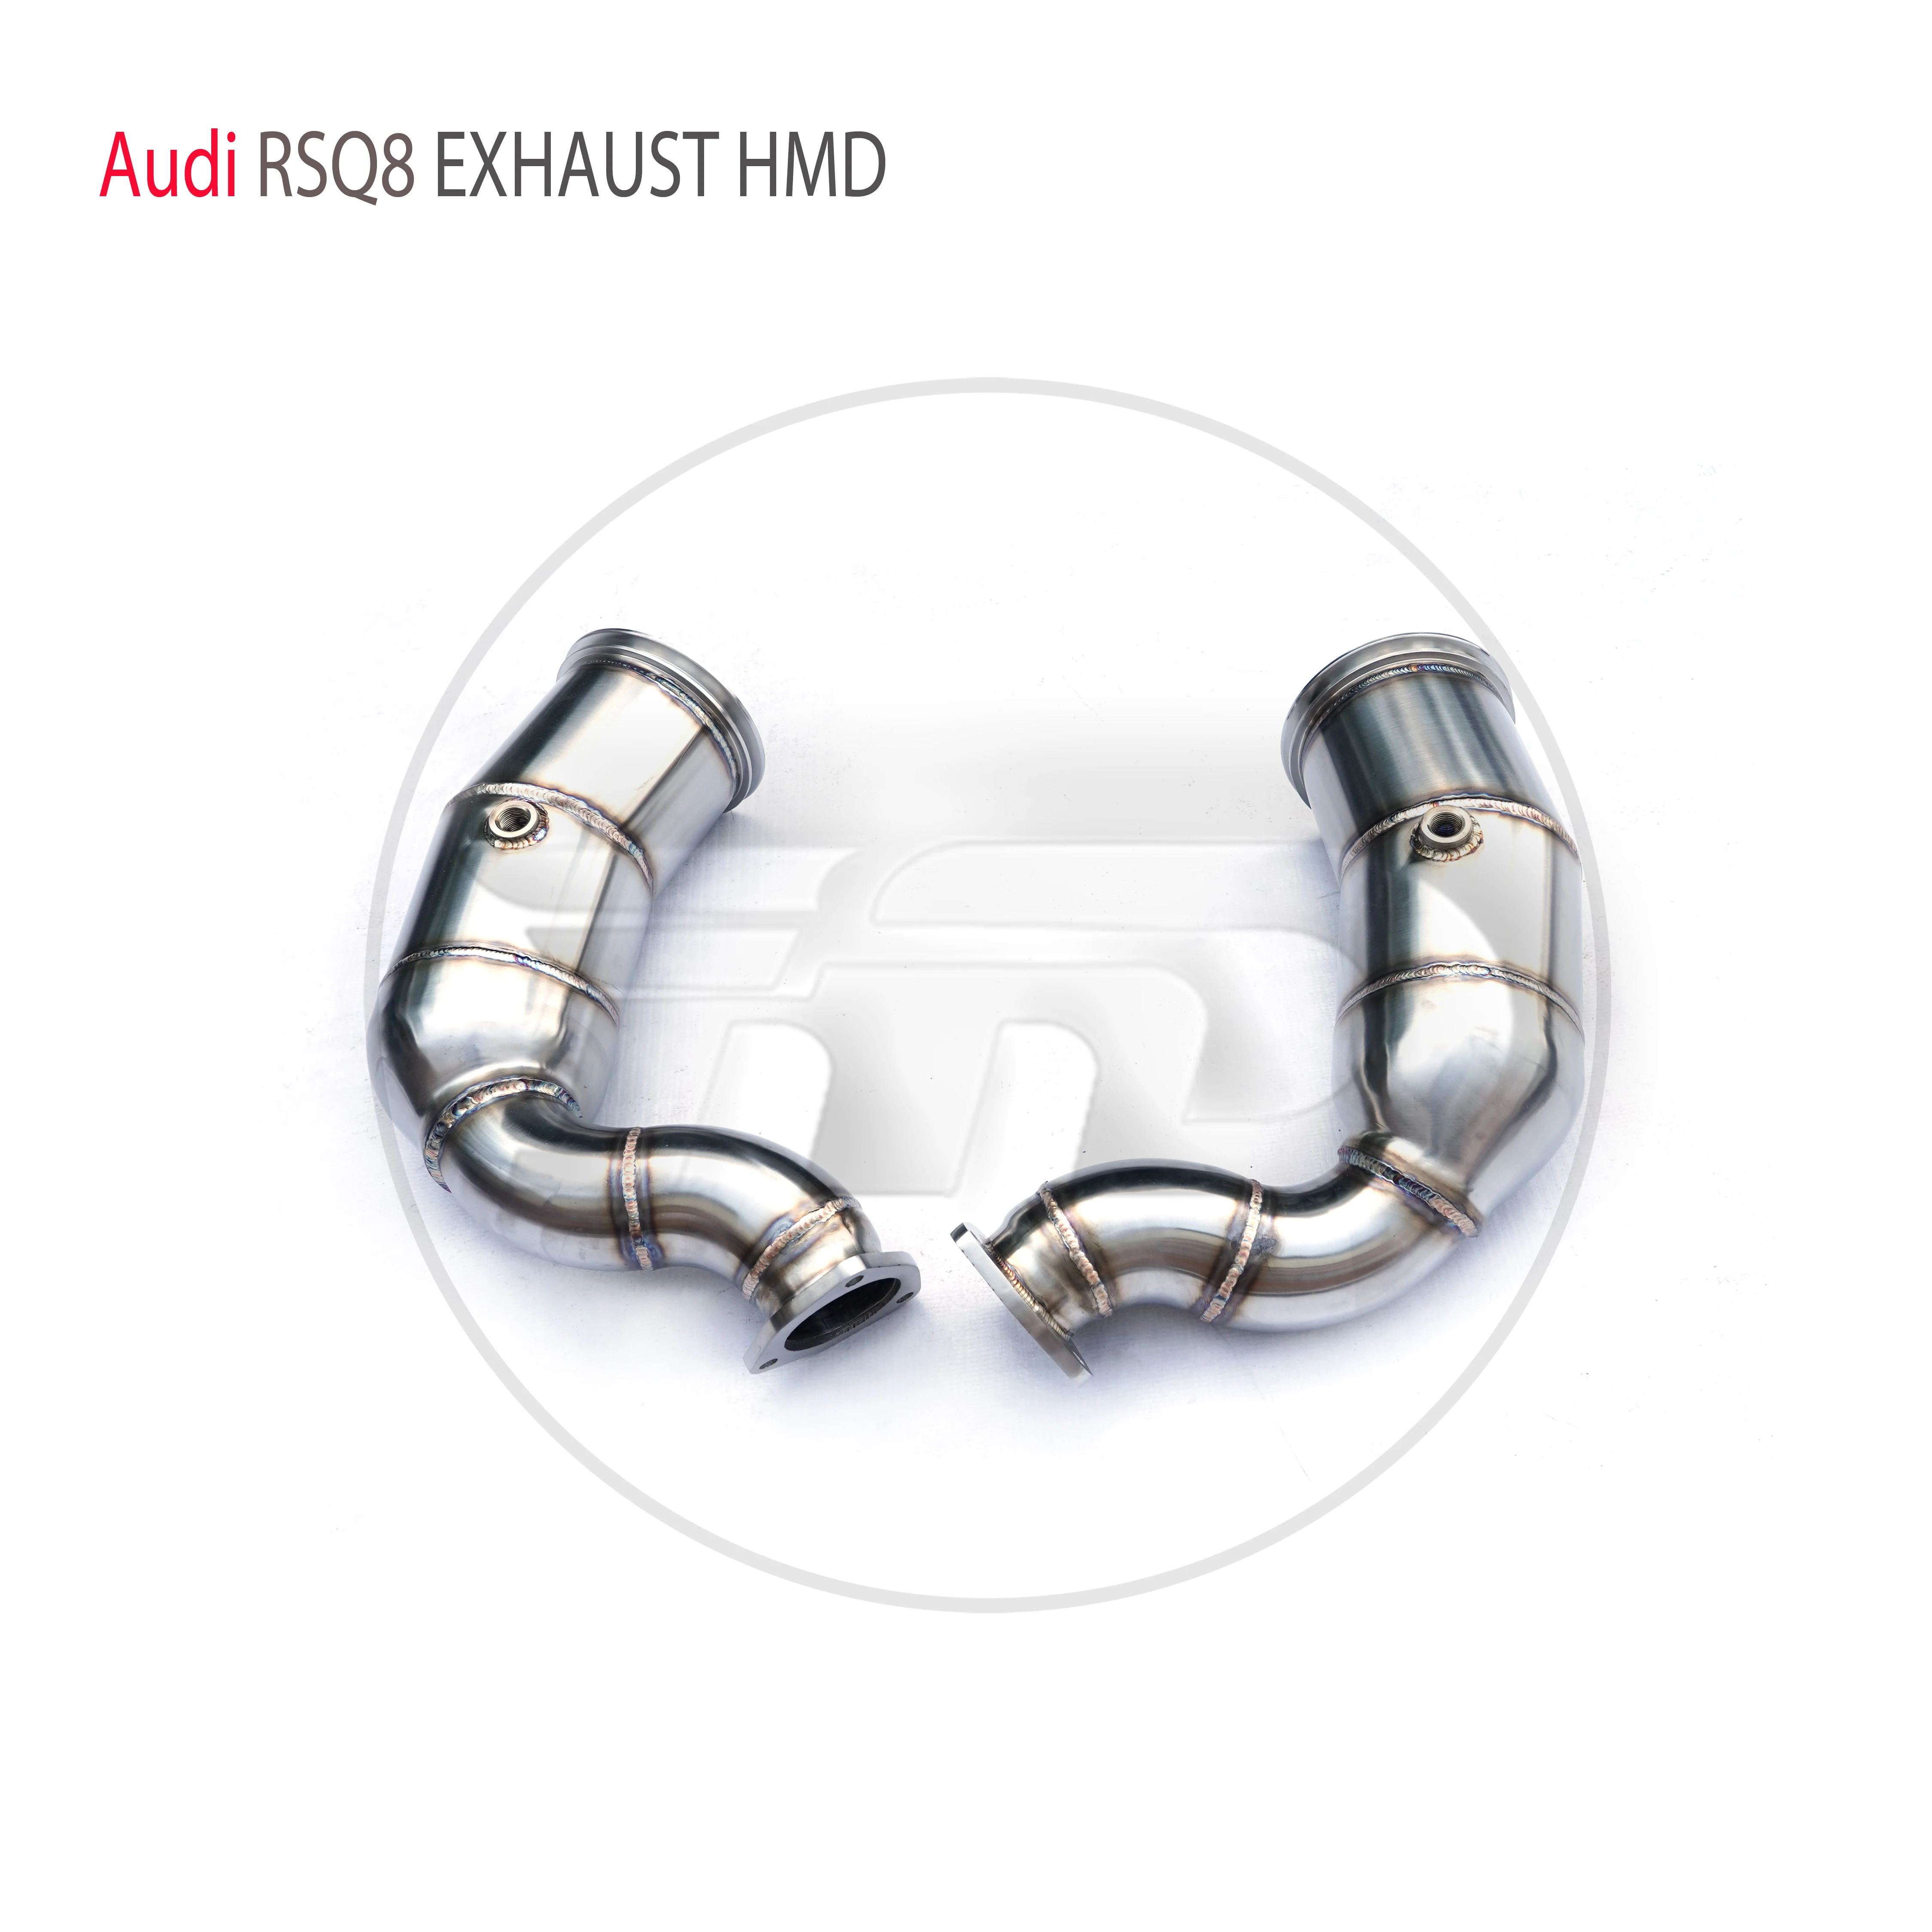 

HMD Exhaust System High Flow Performance Downpipe for Audi RSQ8 4.0T 2020+ Catalytic Converter Headers